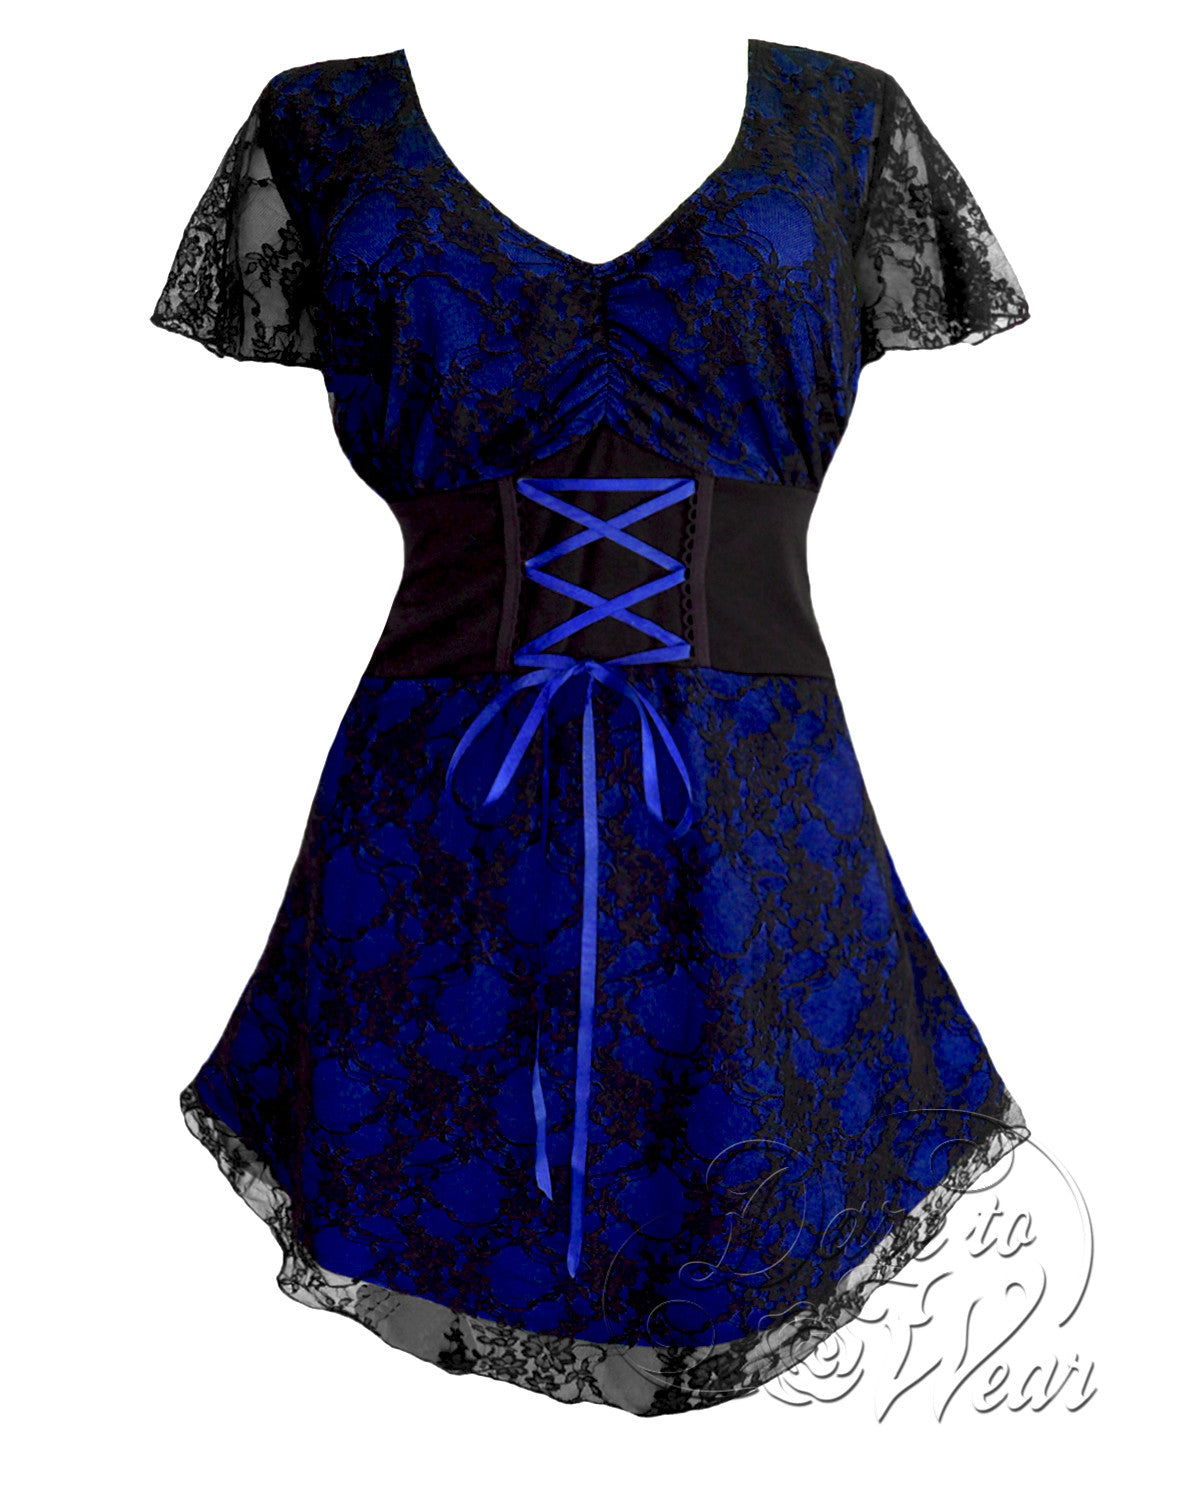 Authentic Corsetry & Fashion 'Corsetry' - The Little Blue Gem